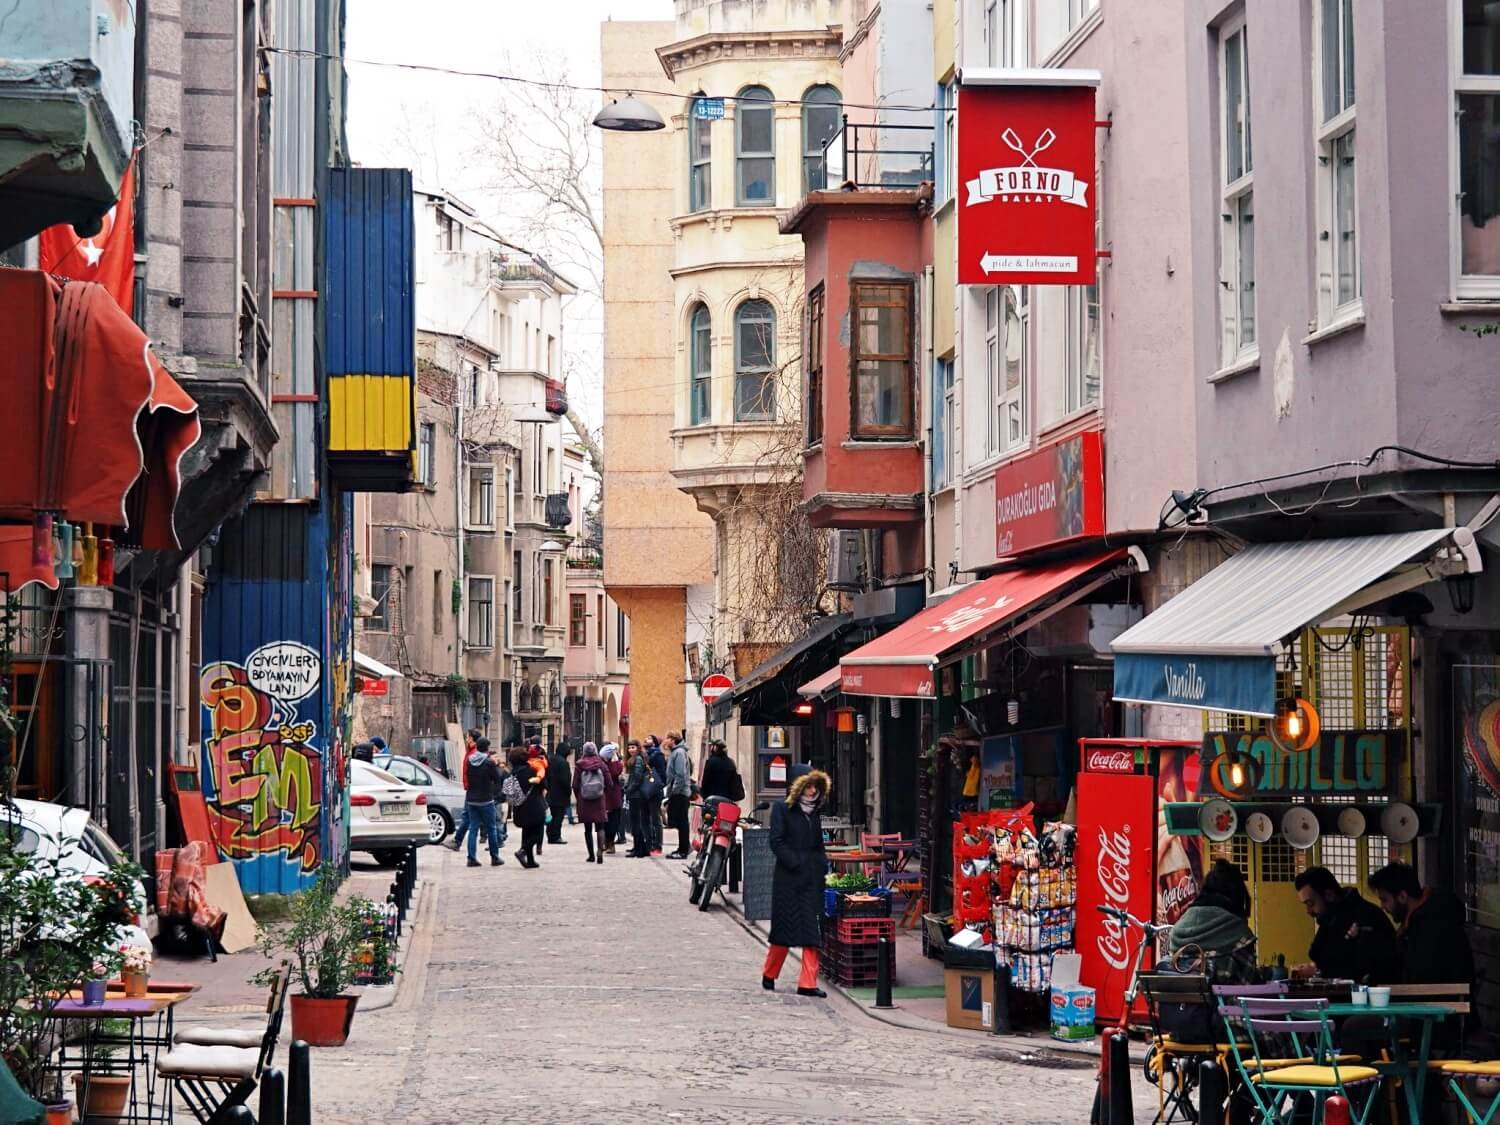 Weather in Istanbul December - a street in Balat, Istanbul